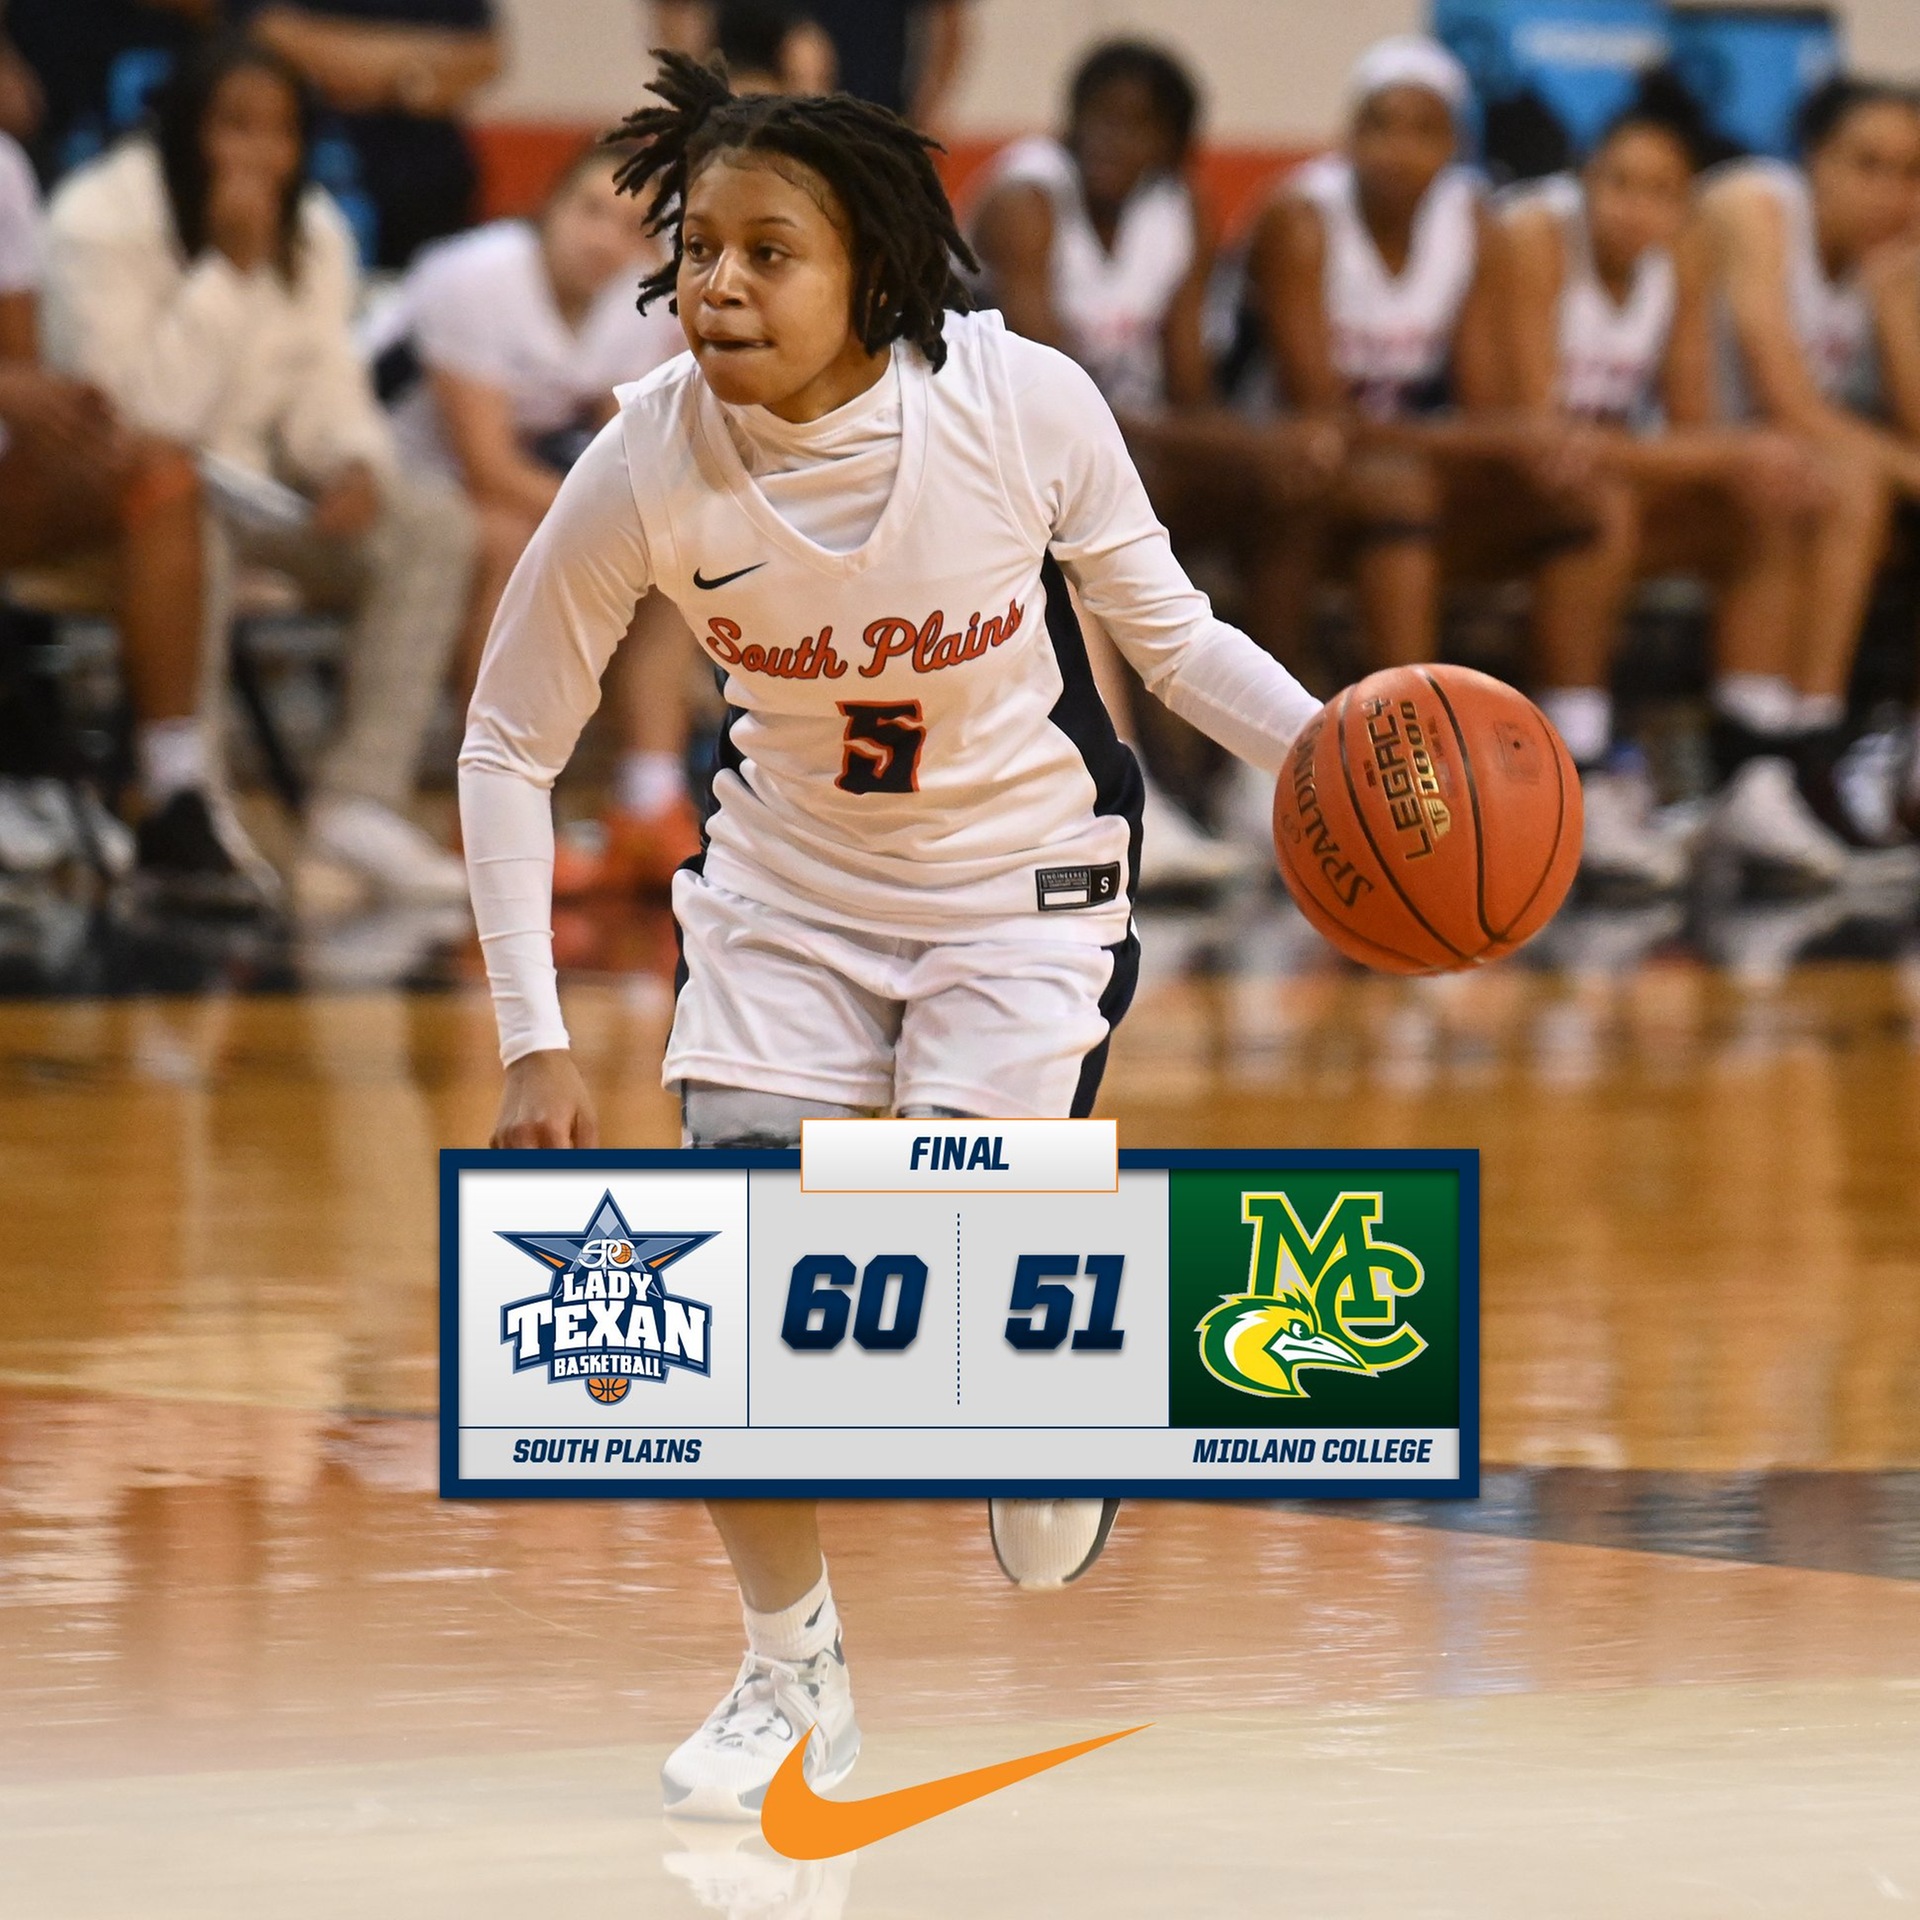 Lady Texans pick up crucial conference road win Monday, outlast Midland 60-51